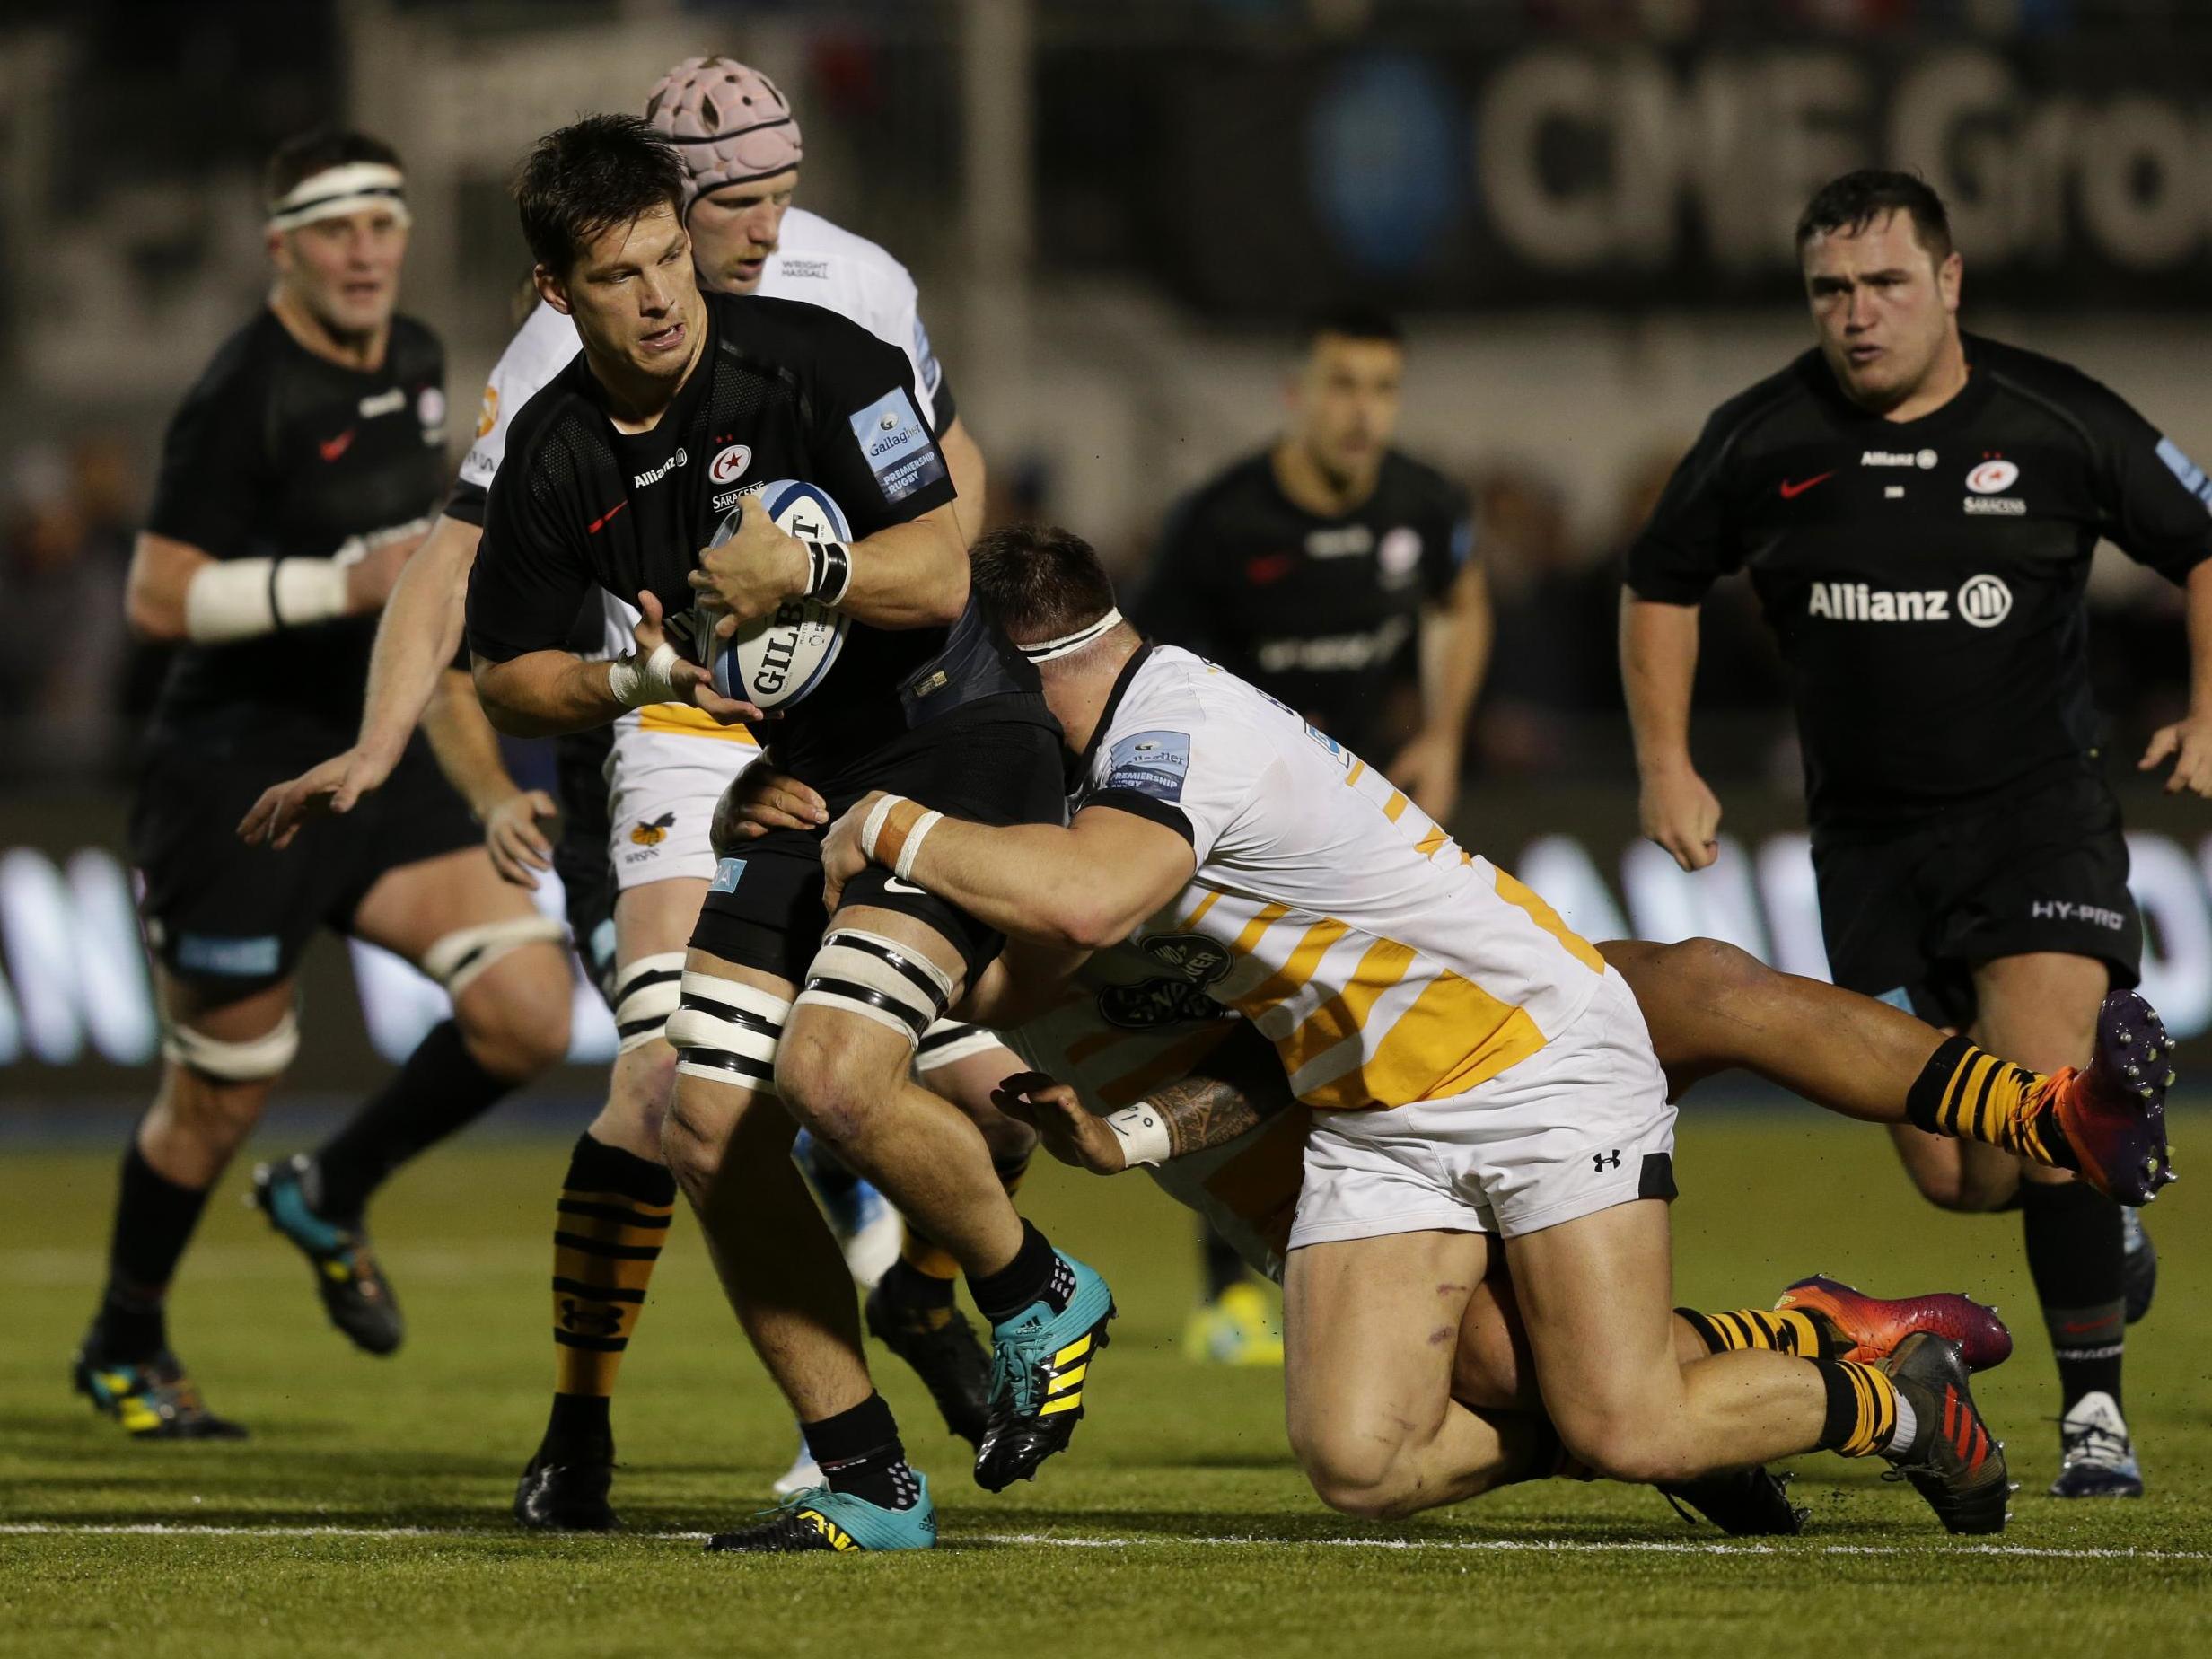 Saracens and Wasps in action over the weekend